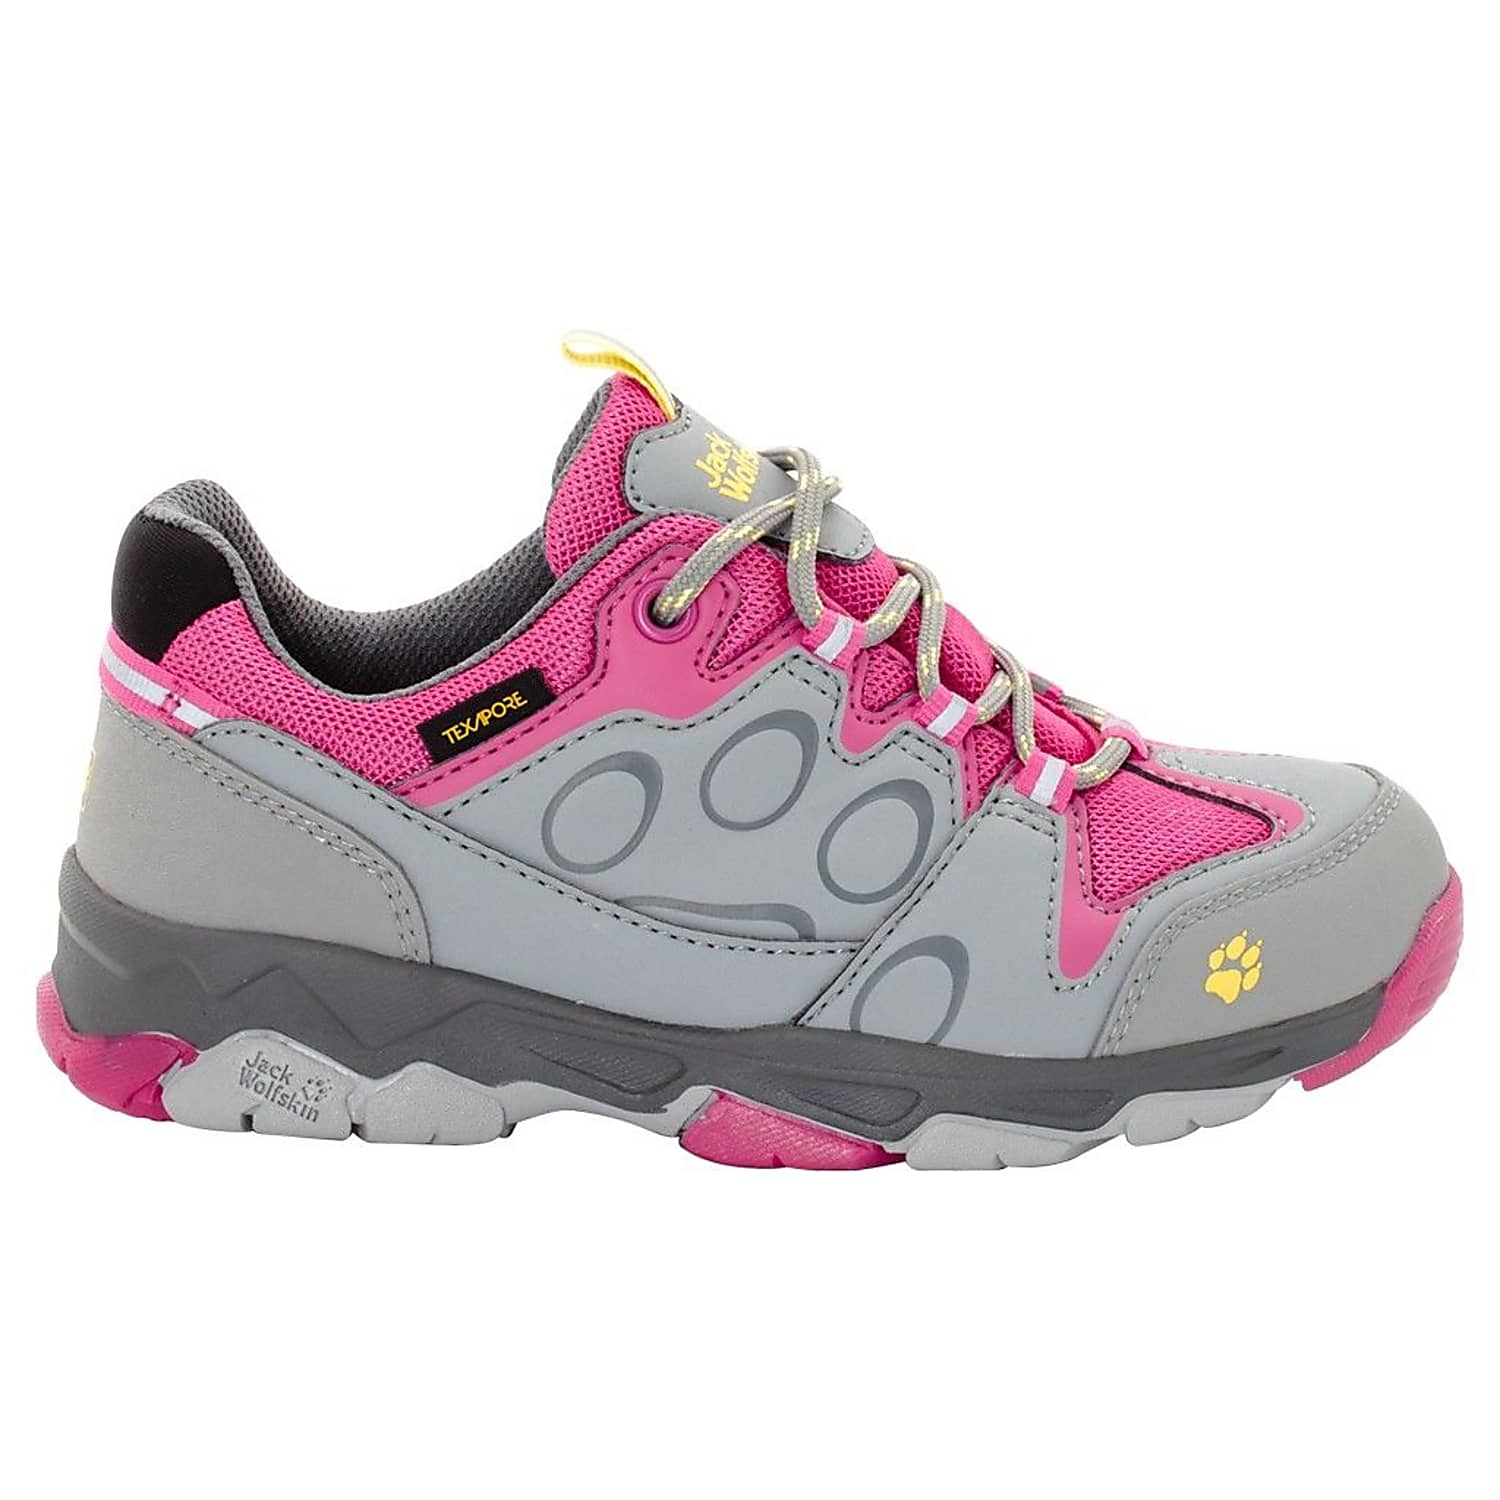 Jack Wolfskin KIDS LOW, 2 MTN shipping cheap Fast Pink - ATTACK and Tropic TEXAPORE